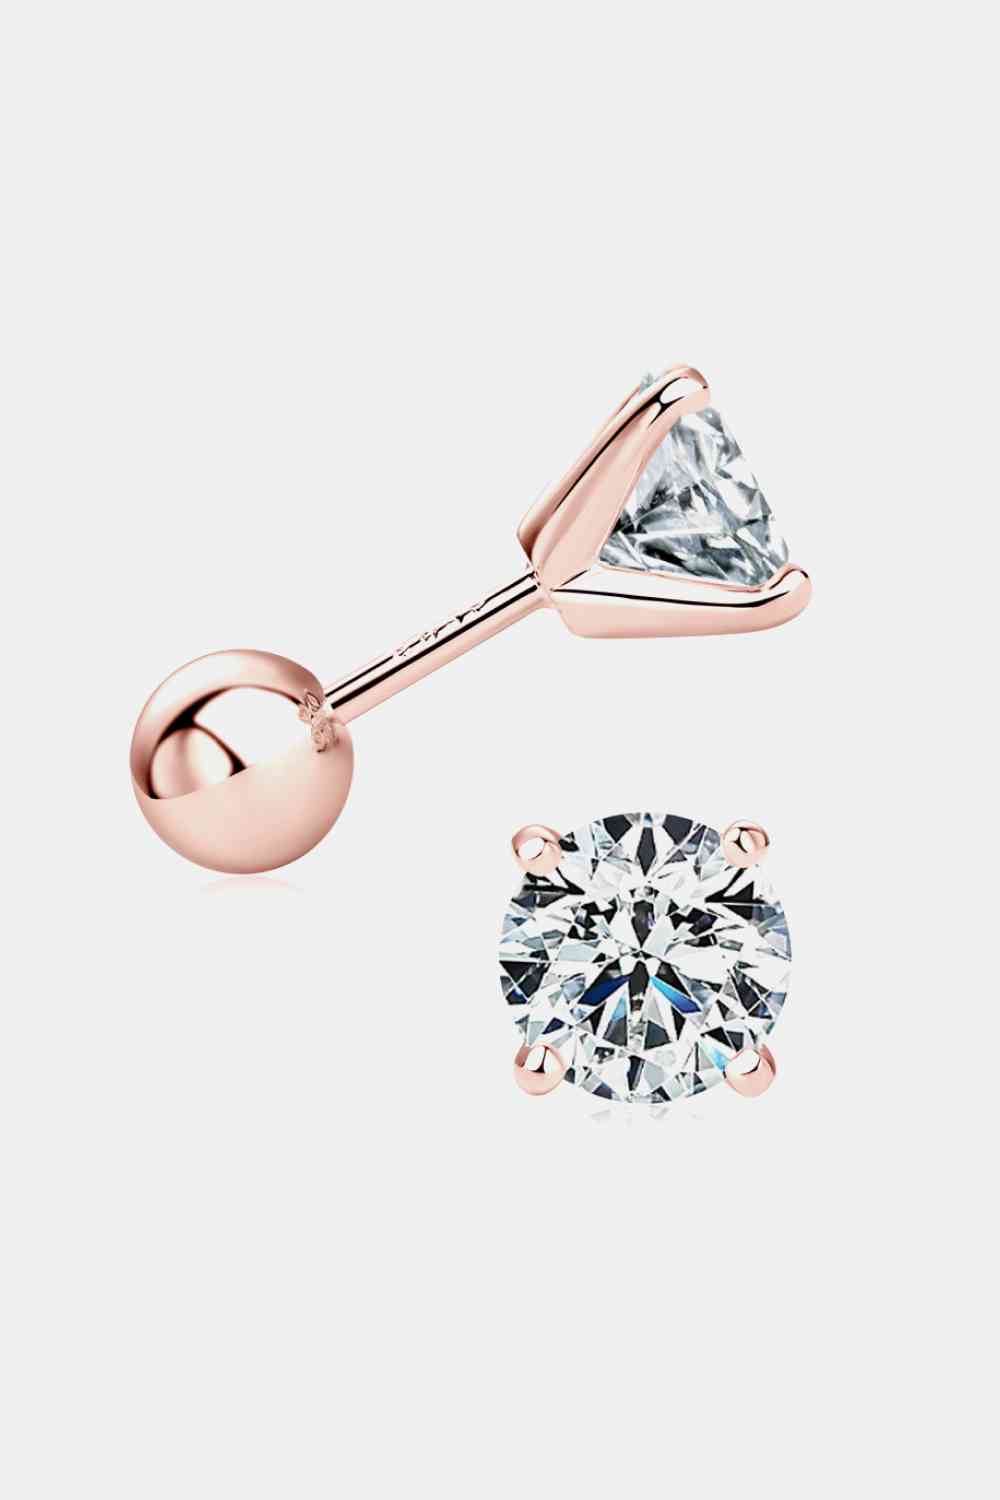 2 Carat Moissanite 925 Sterling Silver Stud Earrings Rose Gold One Size